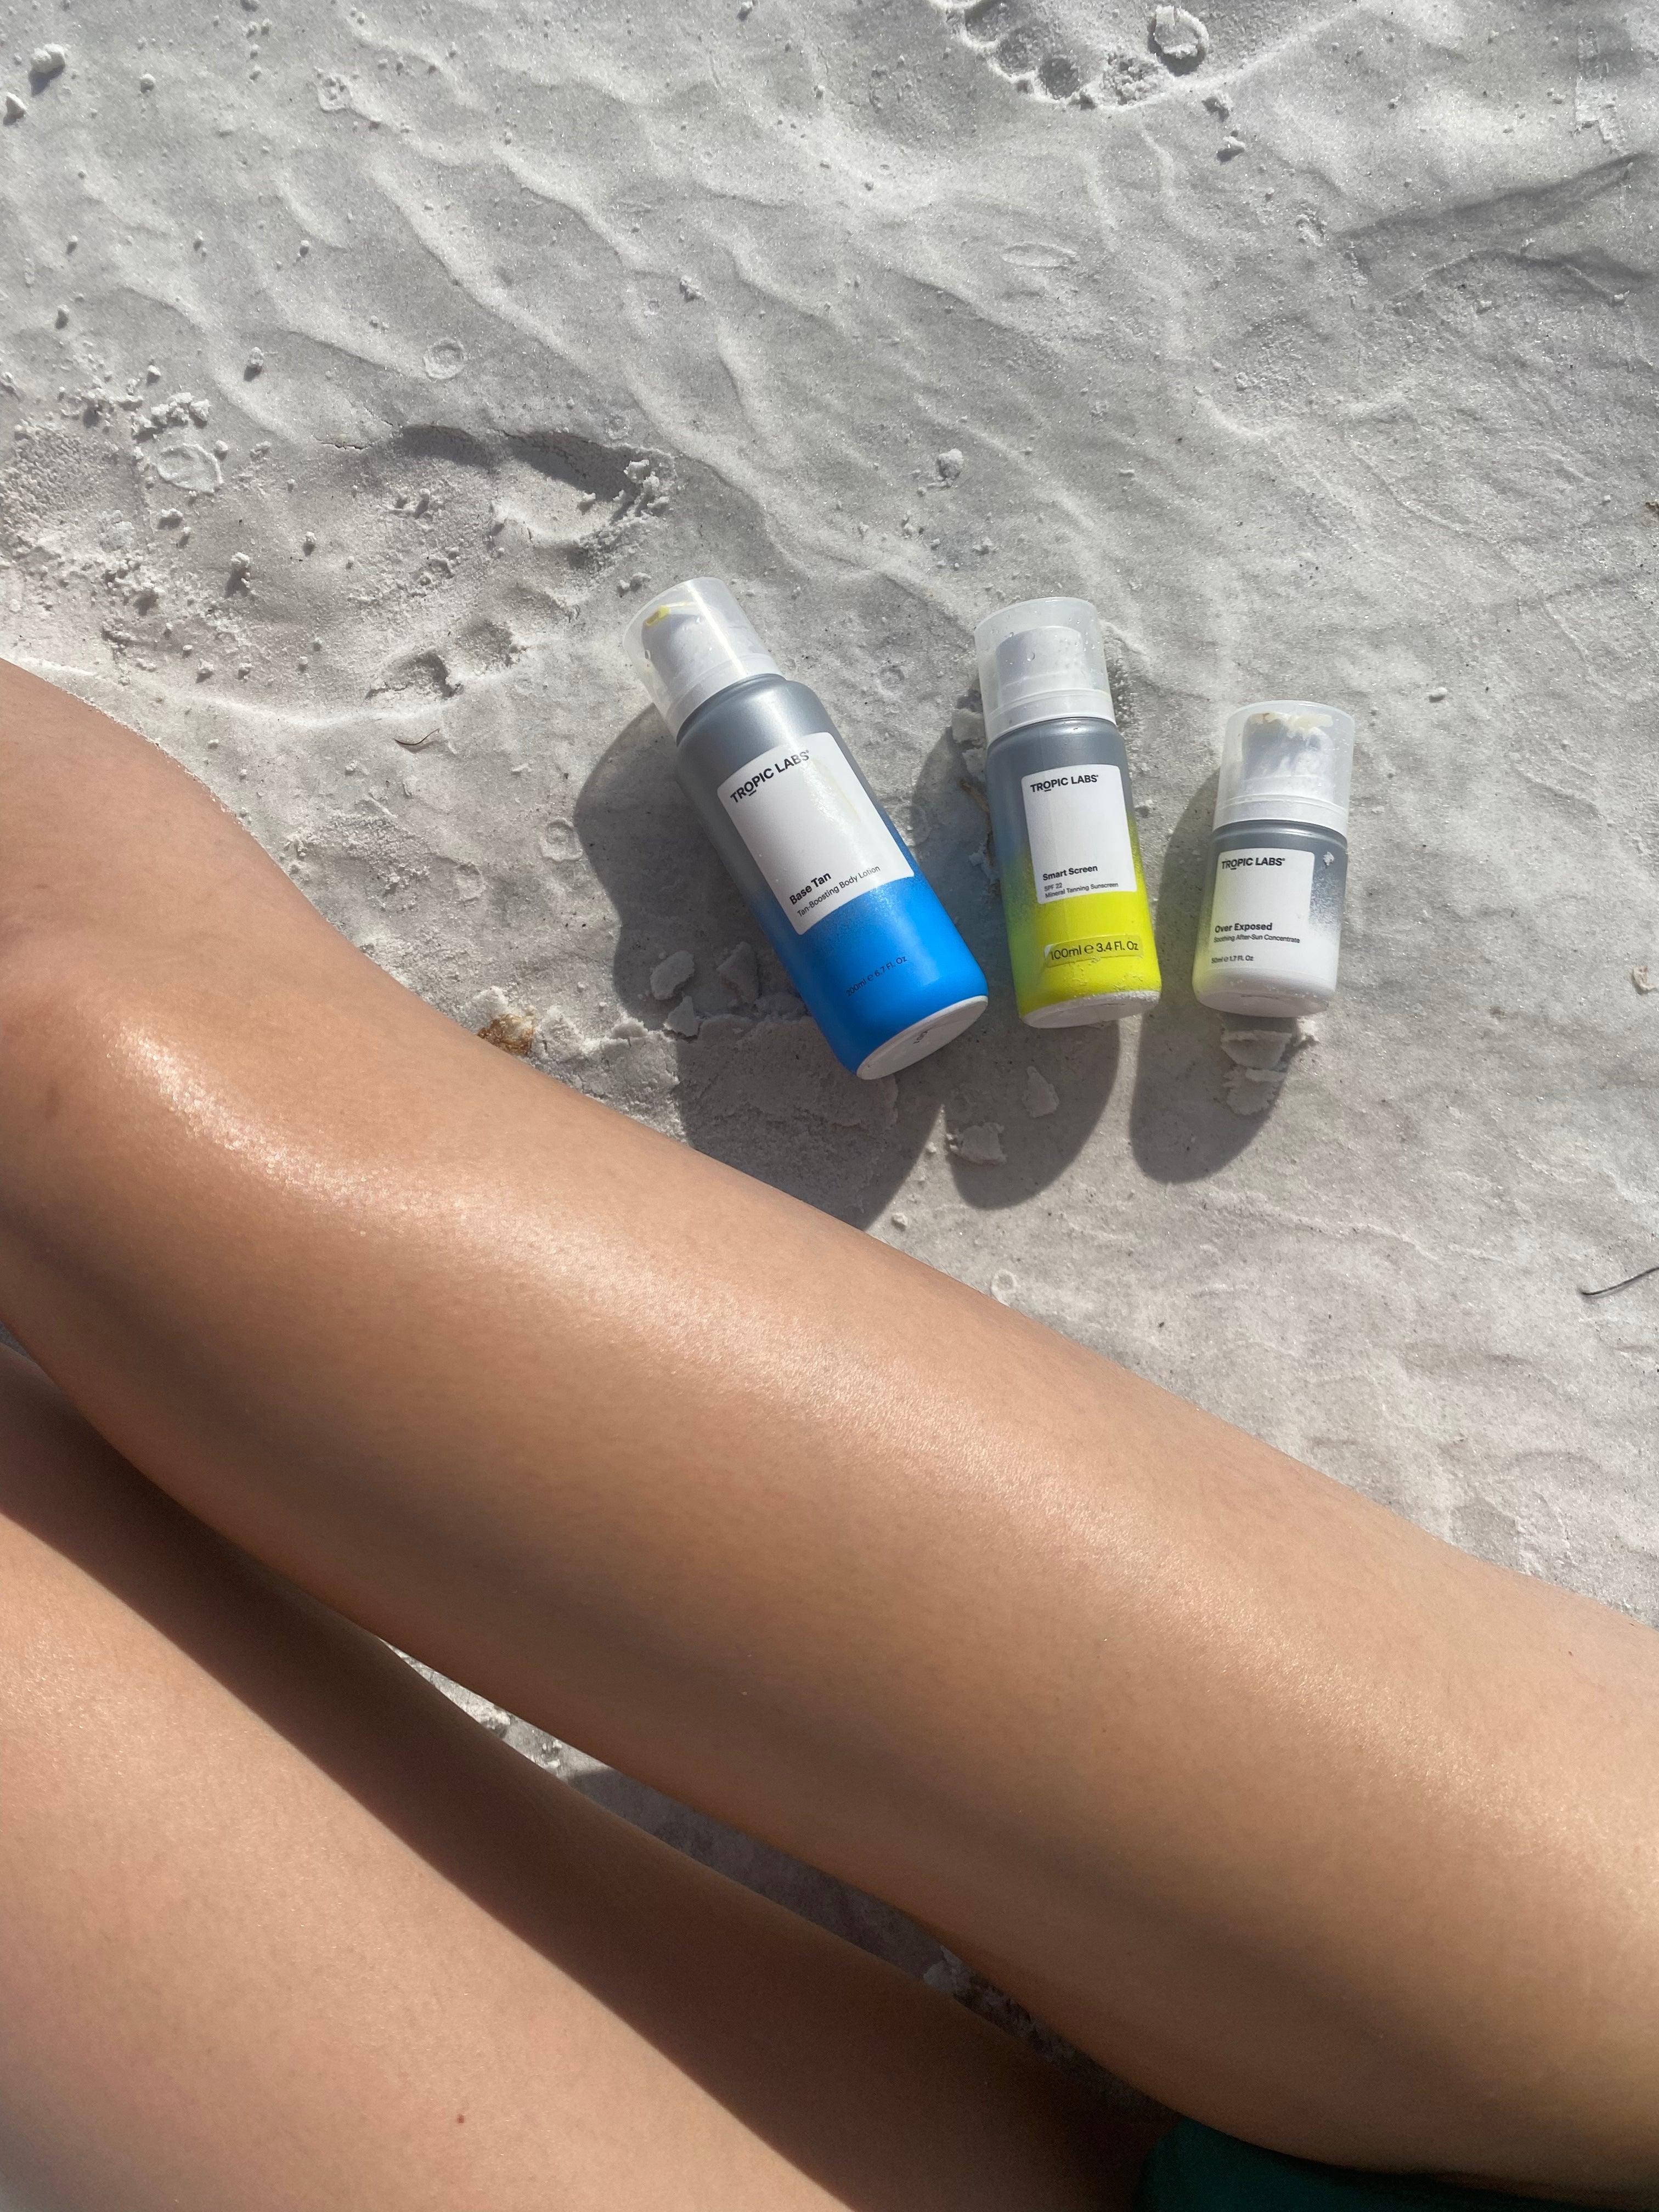 You Can't Get A Tan With Sunscreen and Other Tanning Myths Exposed